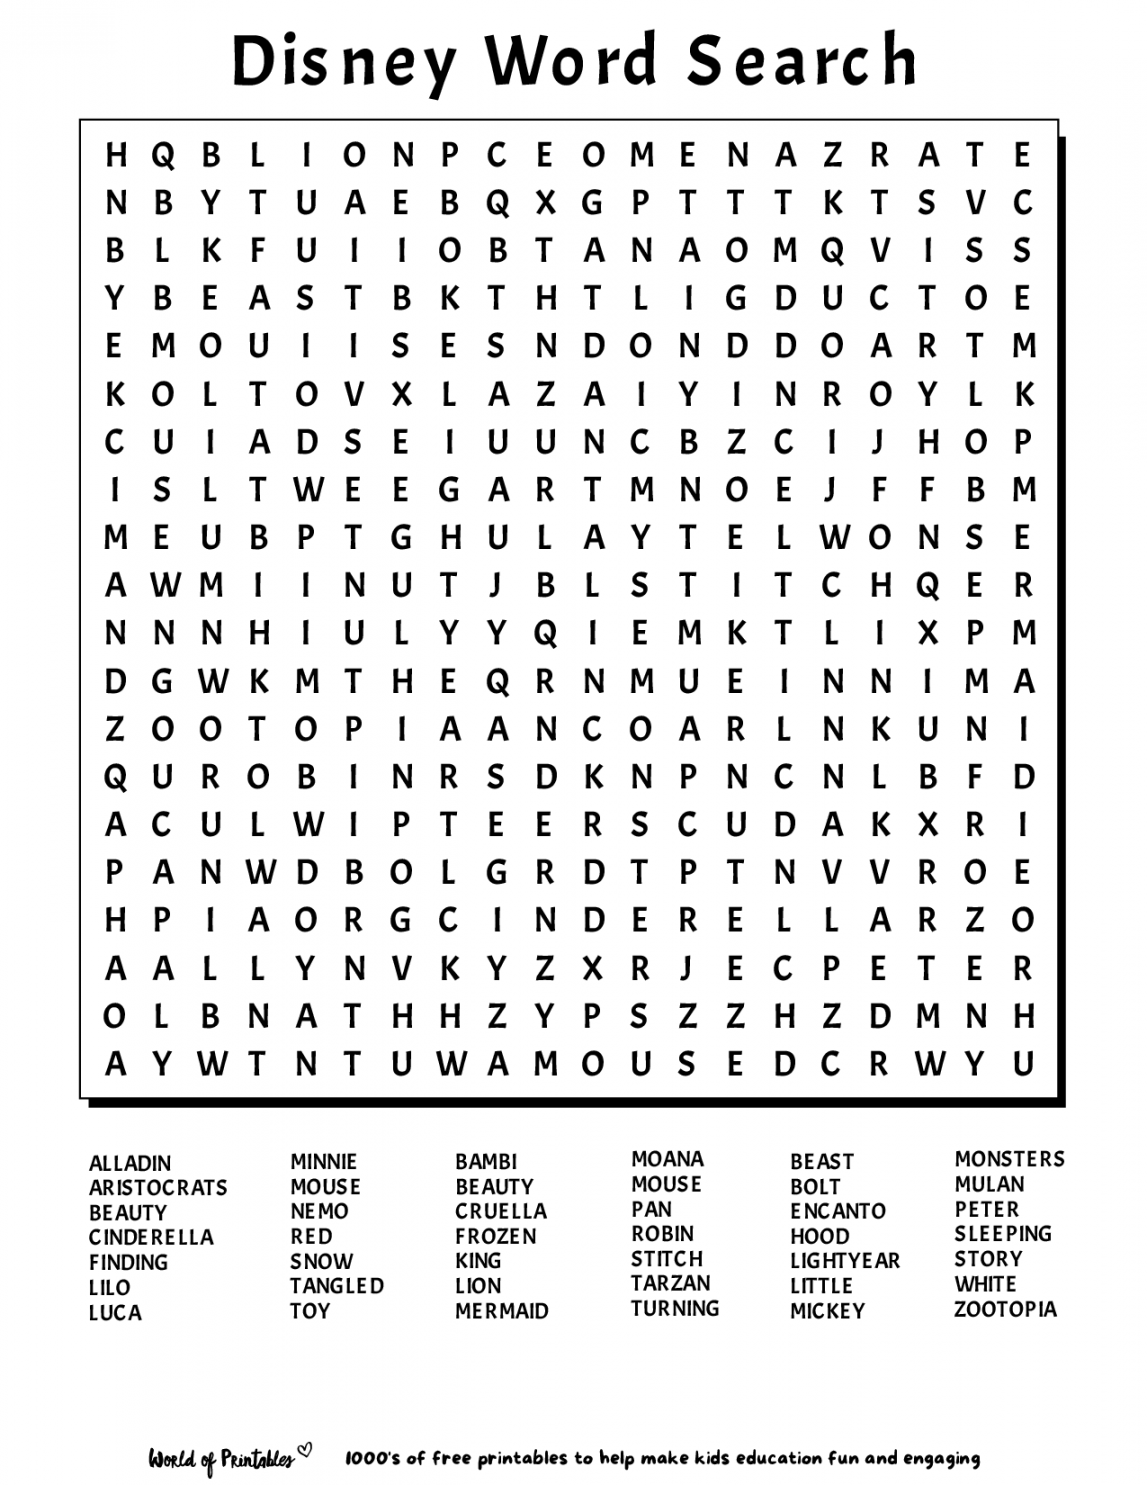 Free Printable Word Searches For Adults - Printable - Printable Word Search  World of Printables